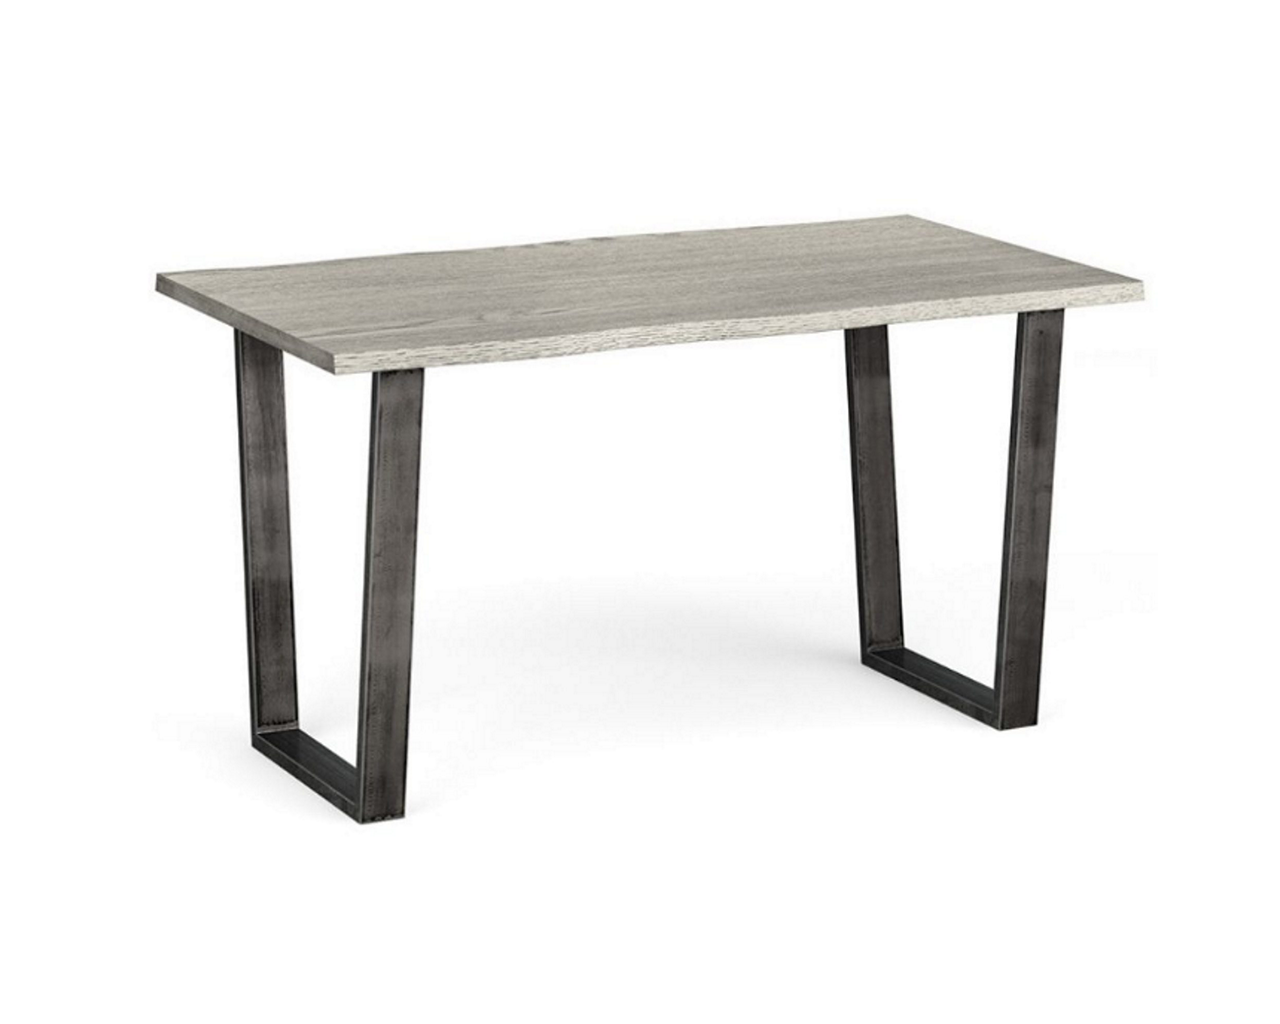 Brooklyn Living and Dining Range - Dining Table